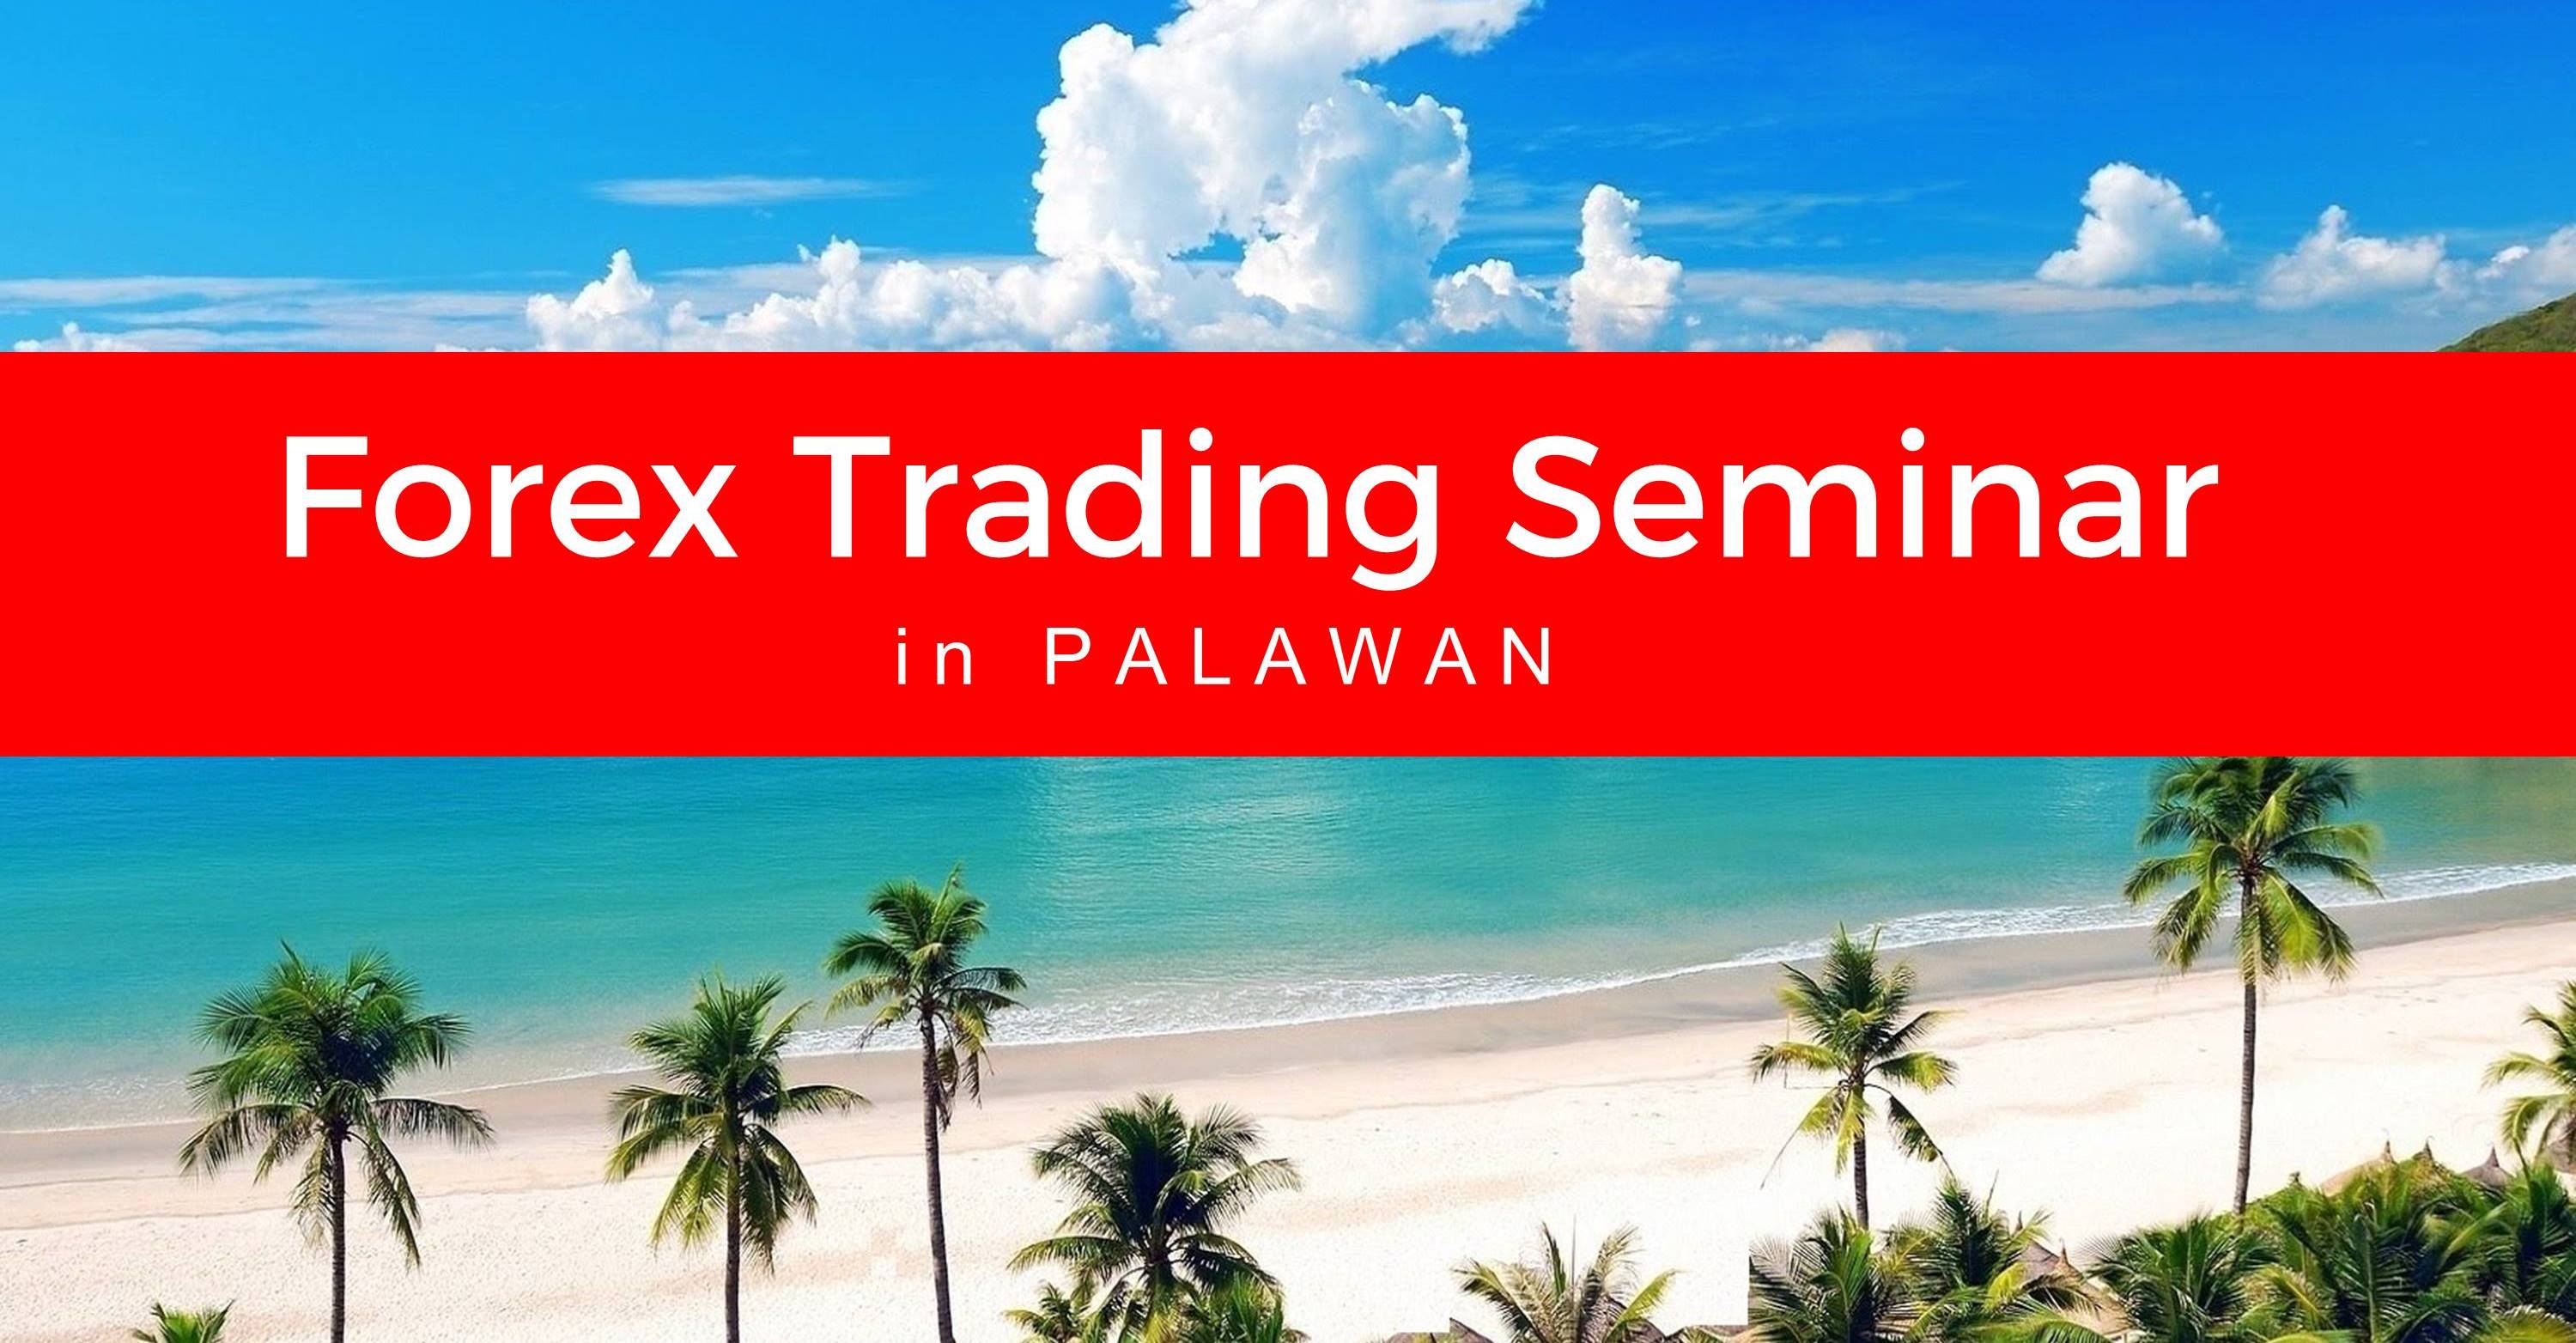 What is forex trading philippines